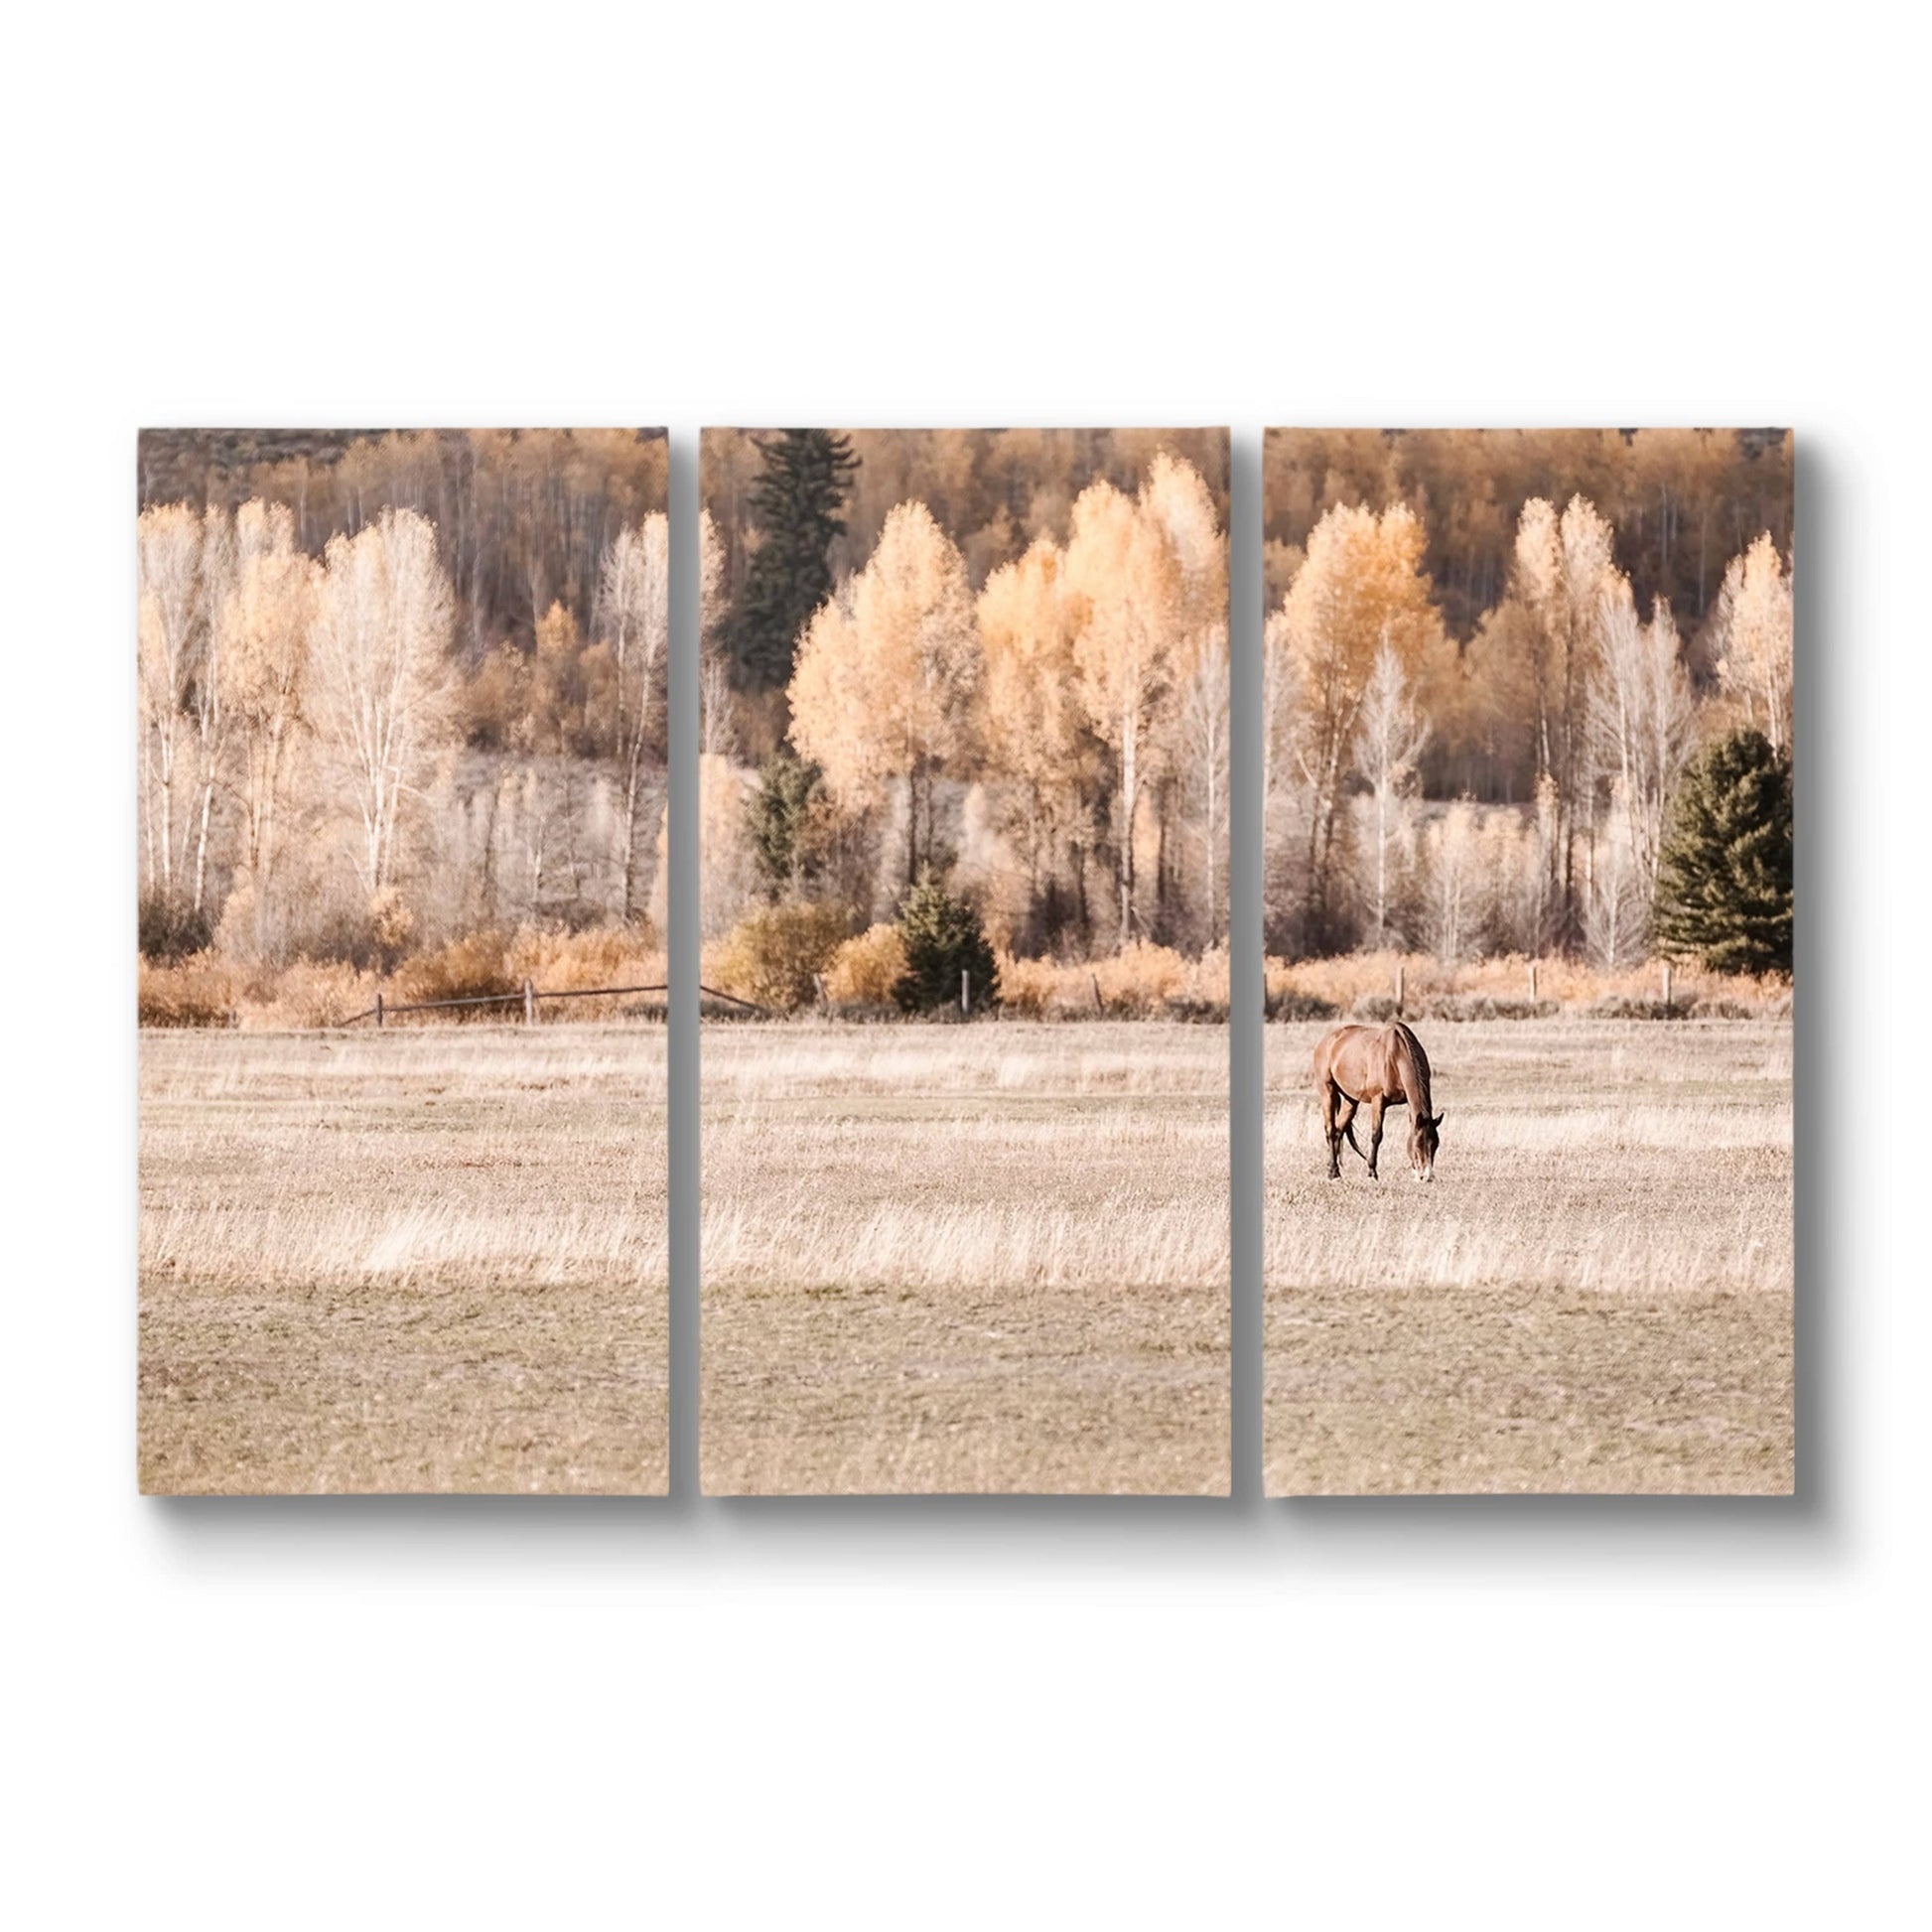 Horse Art for Large Wall - 3 Piece Canvas Triptych 48" x 72" (3 @ 24" x 48") Wall Art Teri James Photography